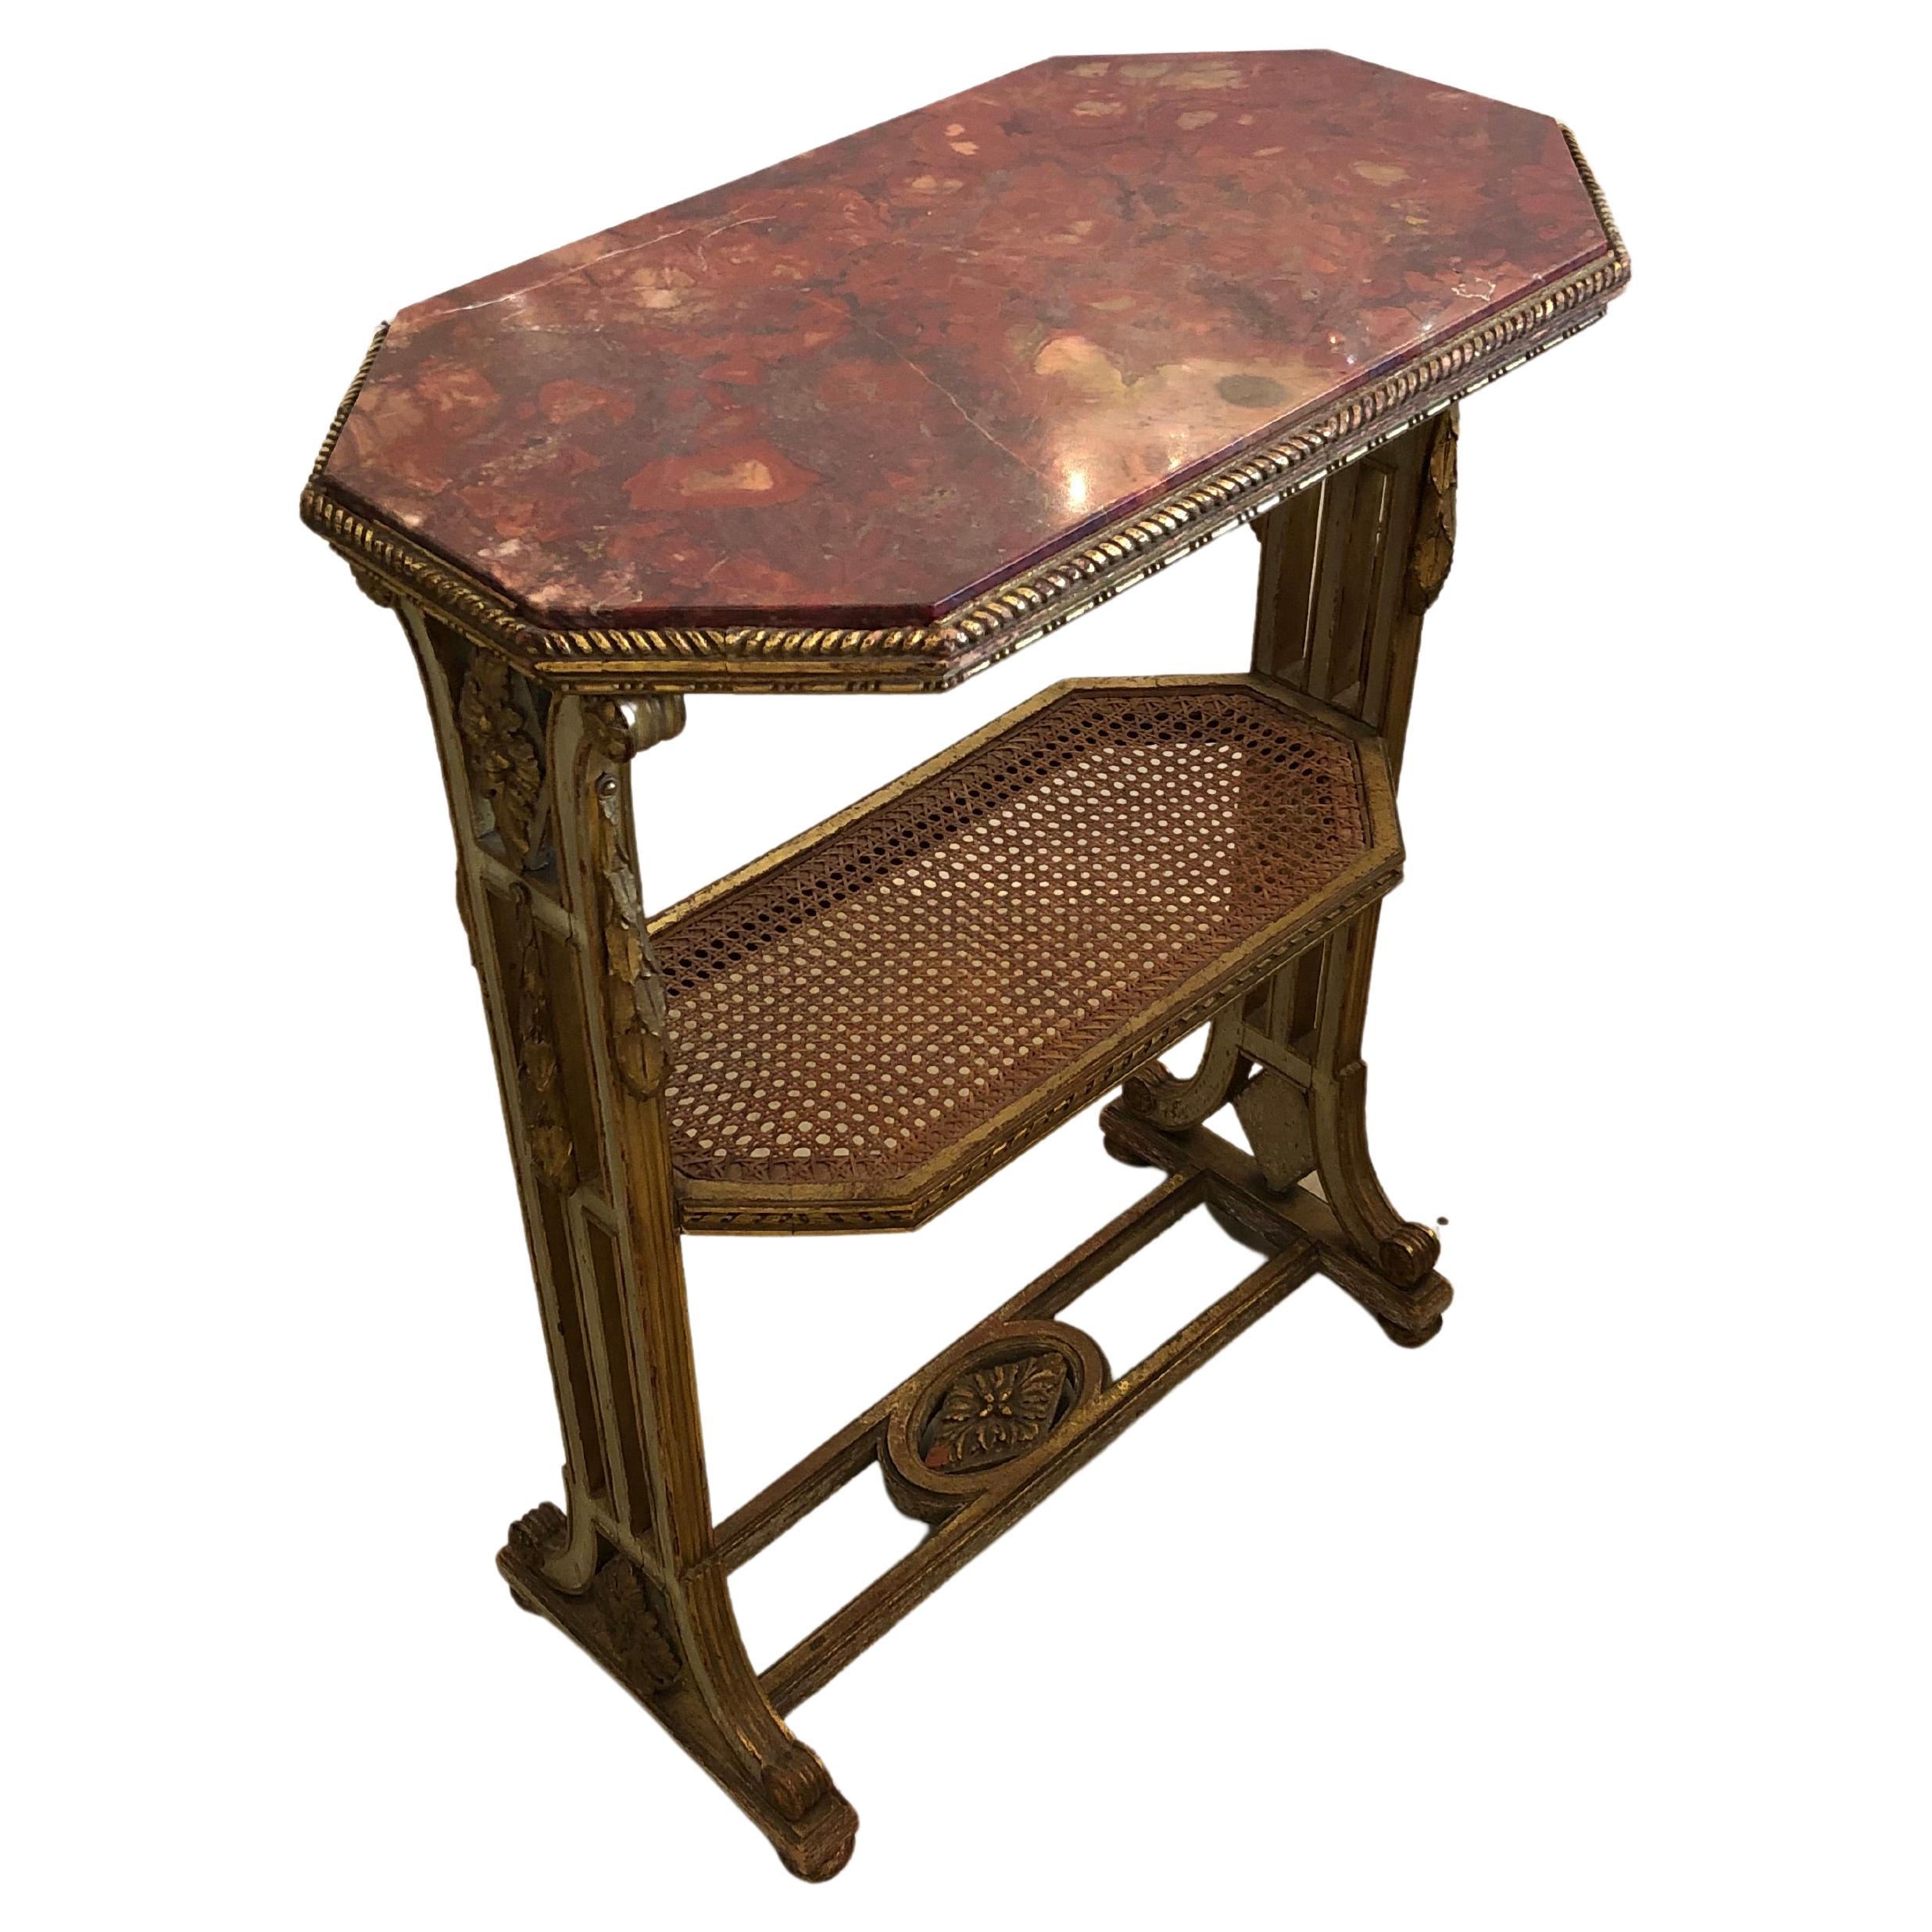 Magnificent 19th Century French Carved Gilded Wood and Marble Top Side Table For Sale